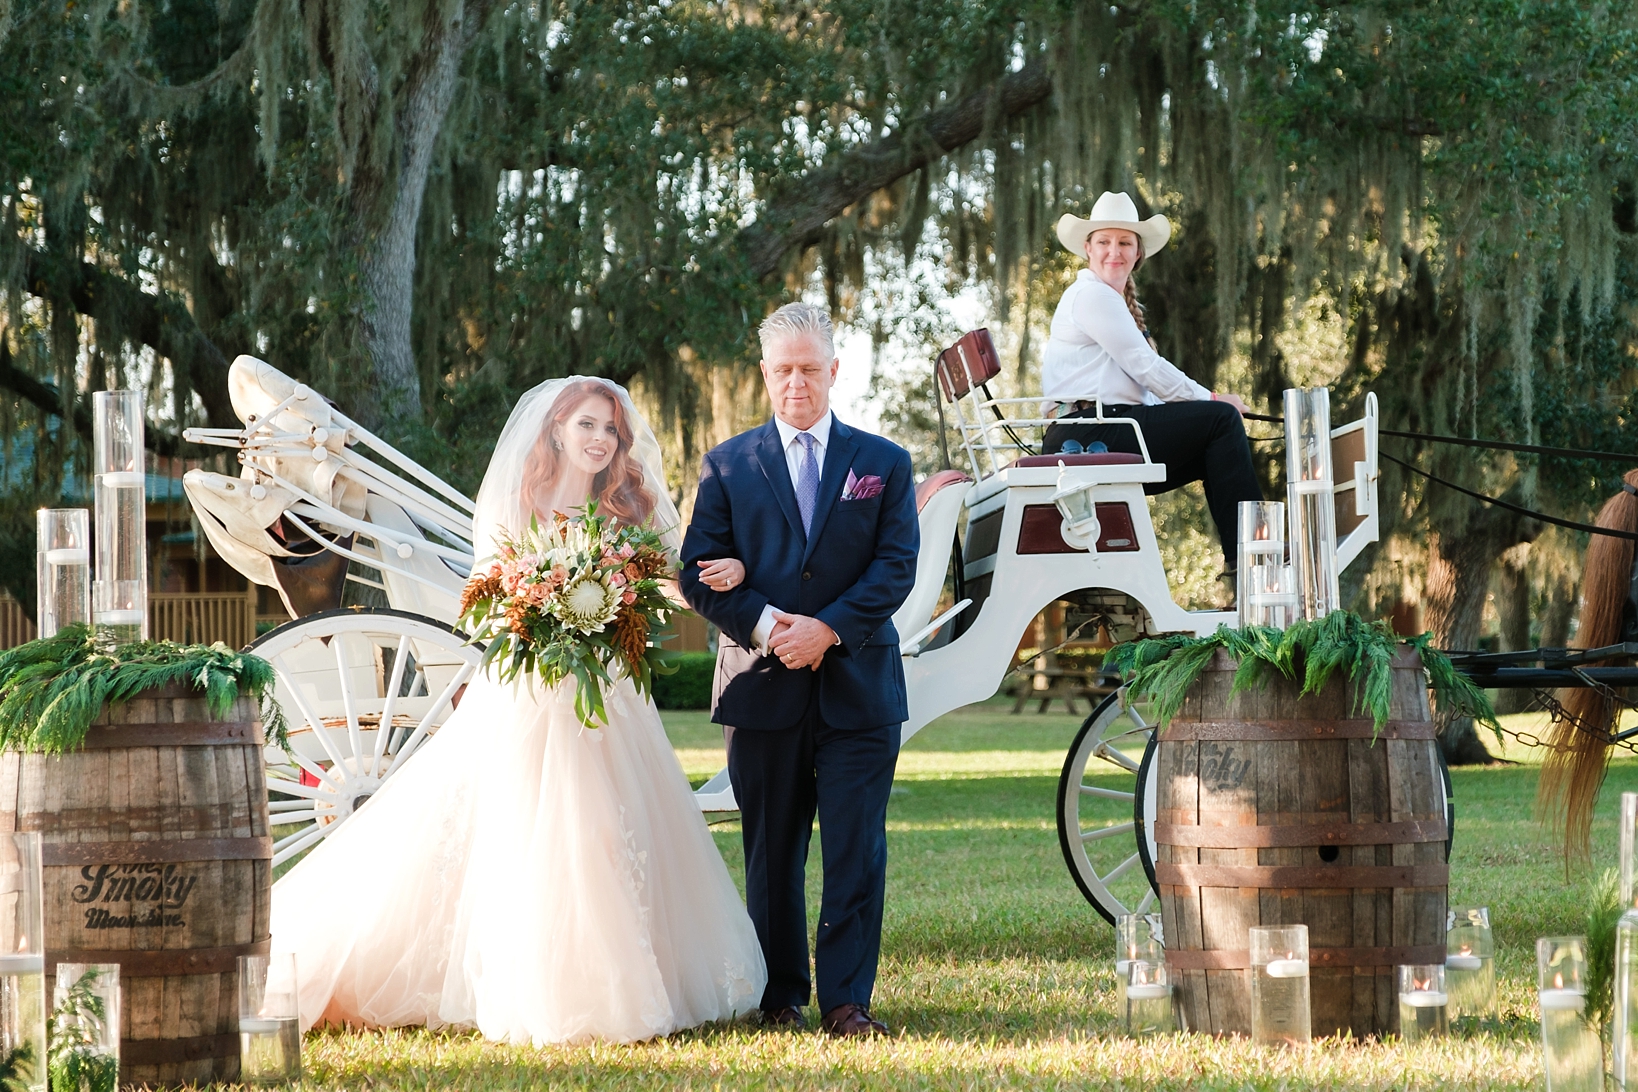 Bride and her Dad arrive to the ceremony in horse drawn carriage